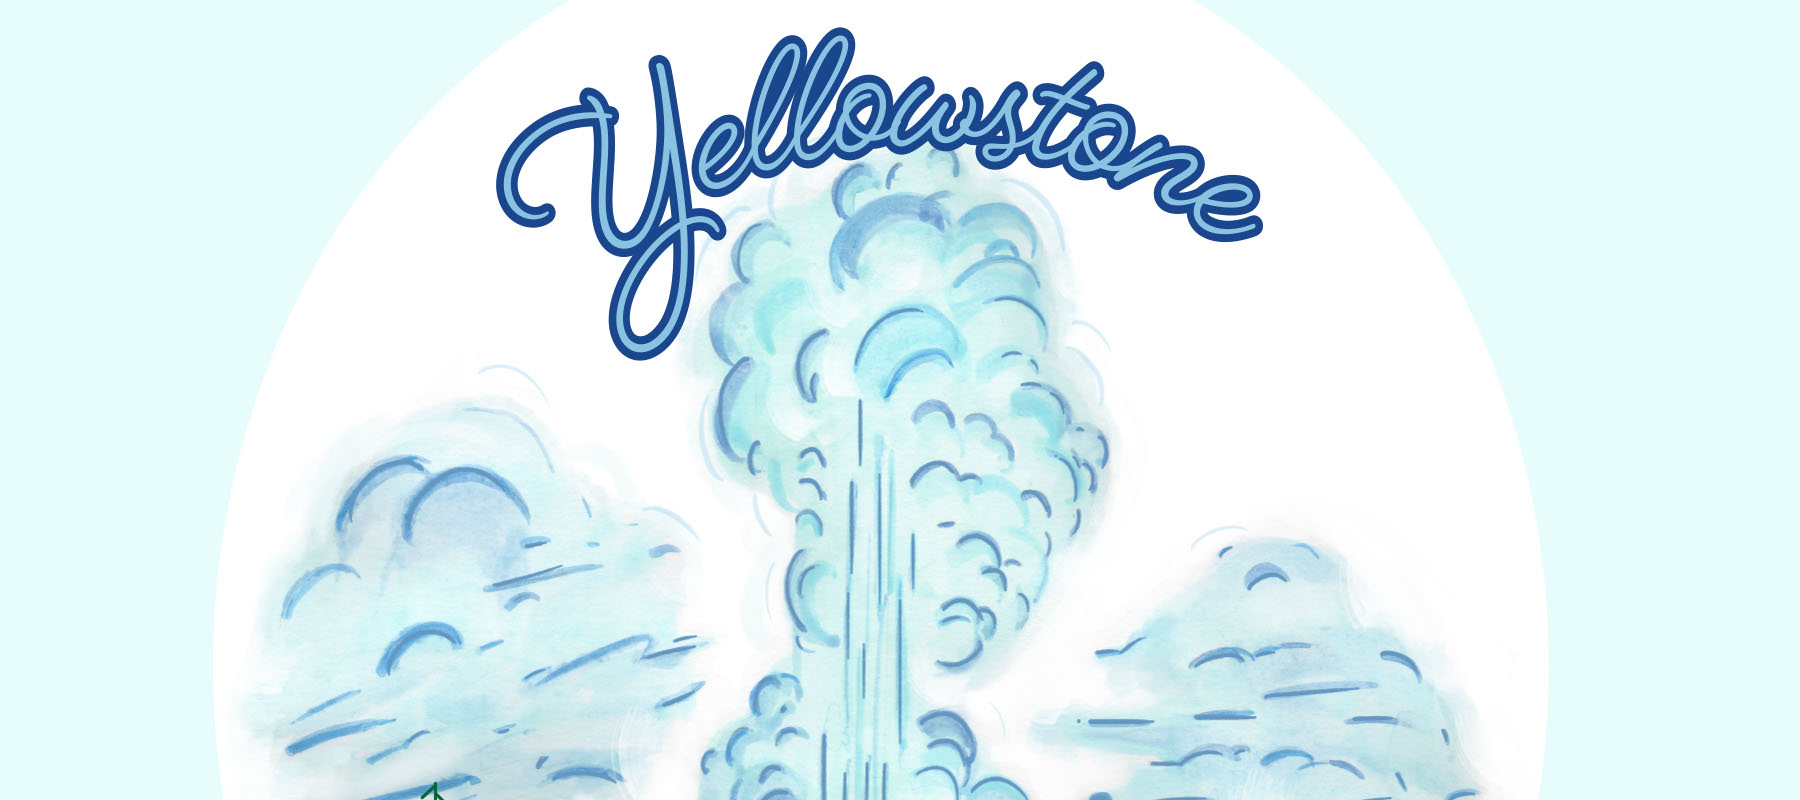 Watercolor image of Yellowstone with Old Faithful